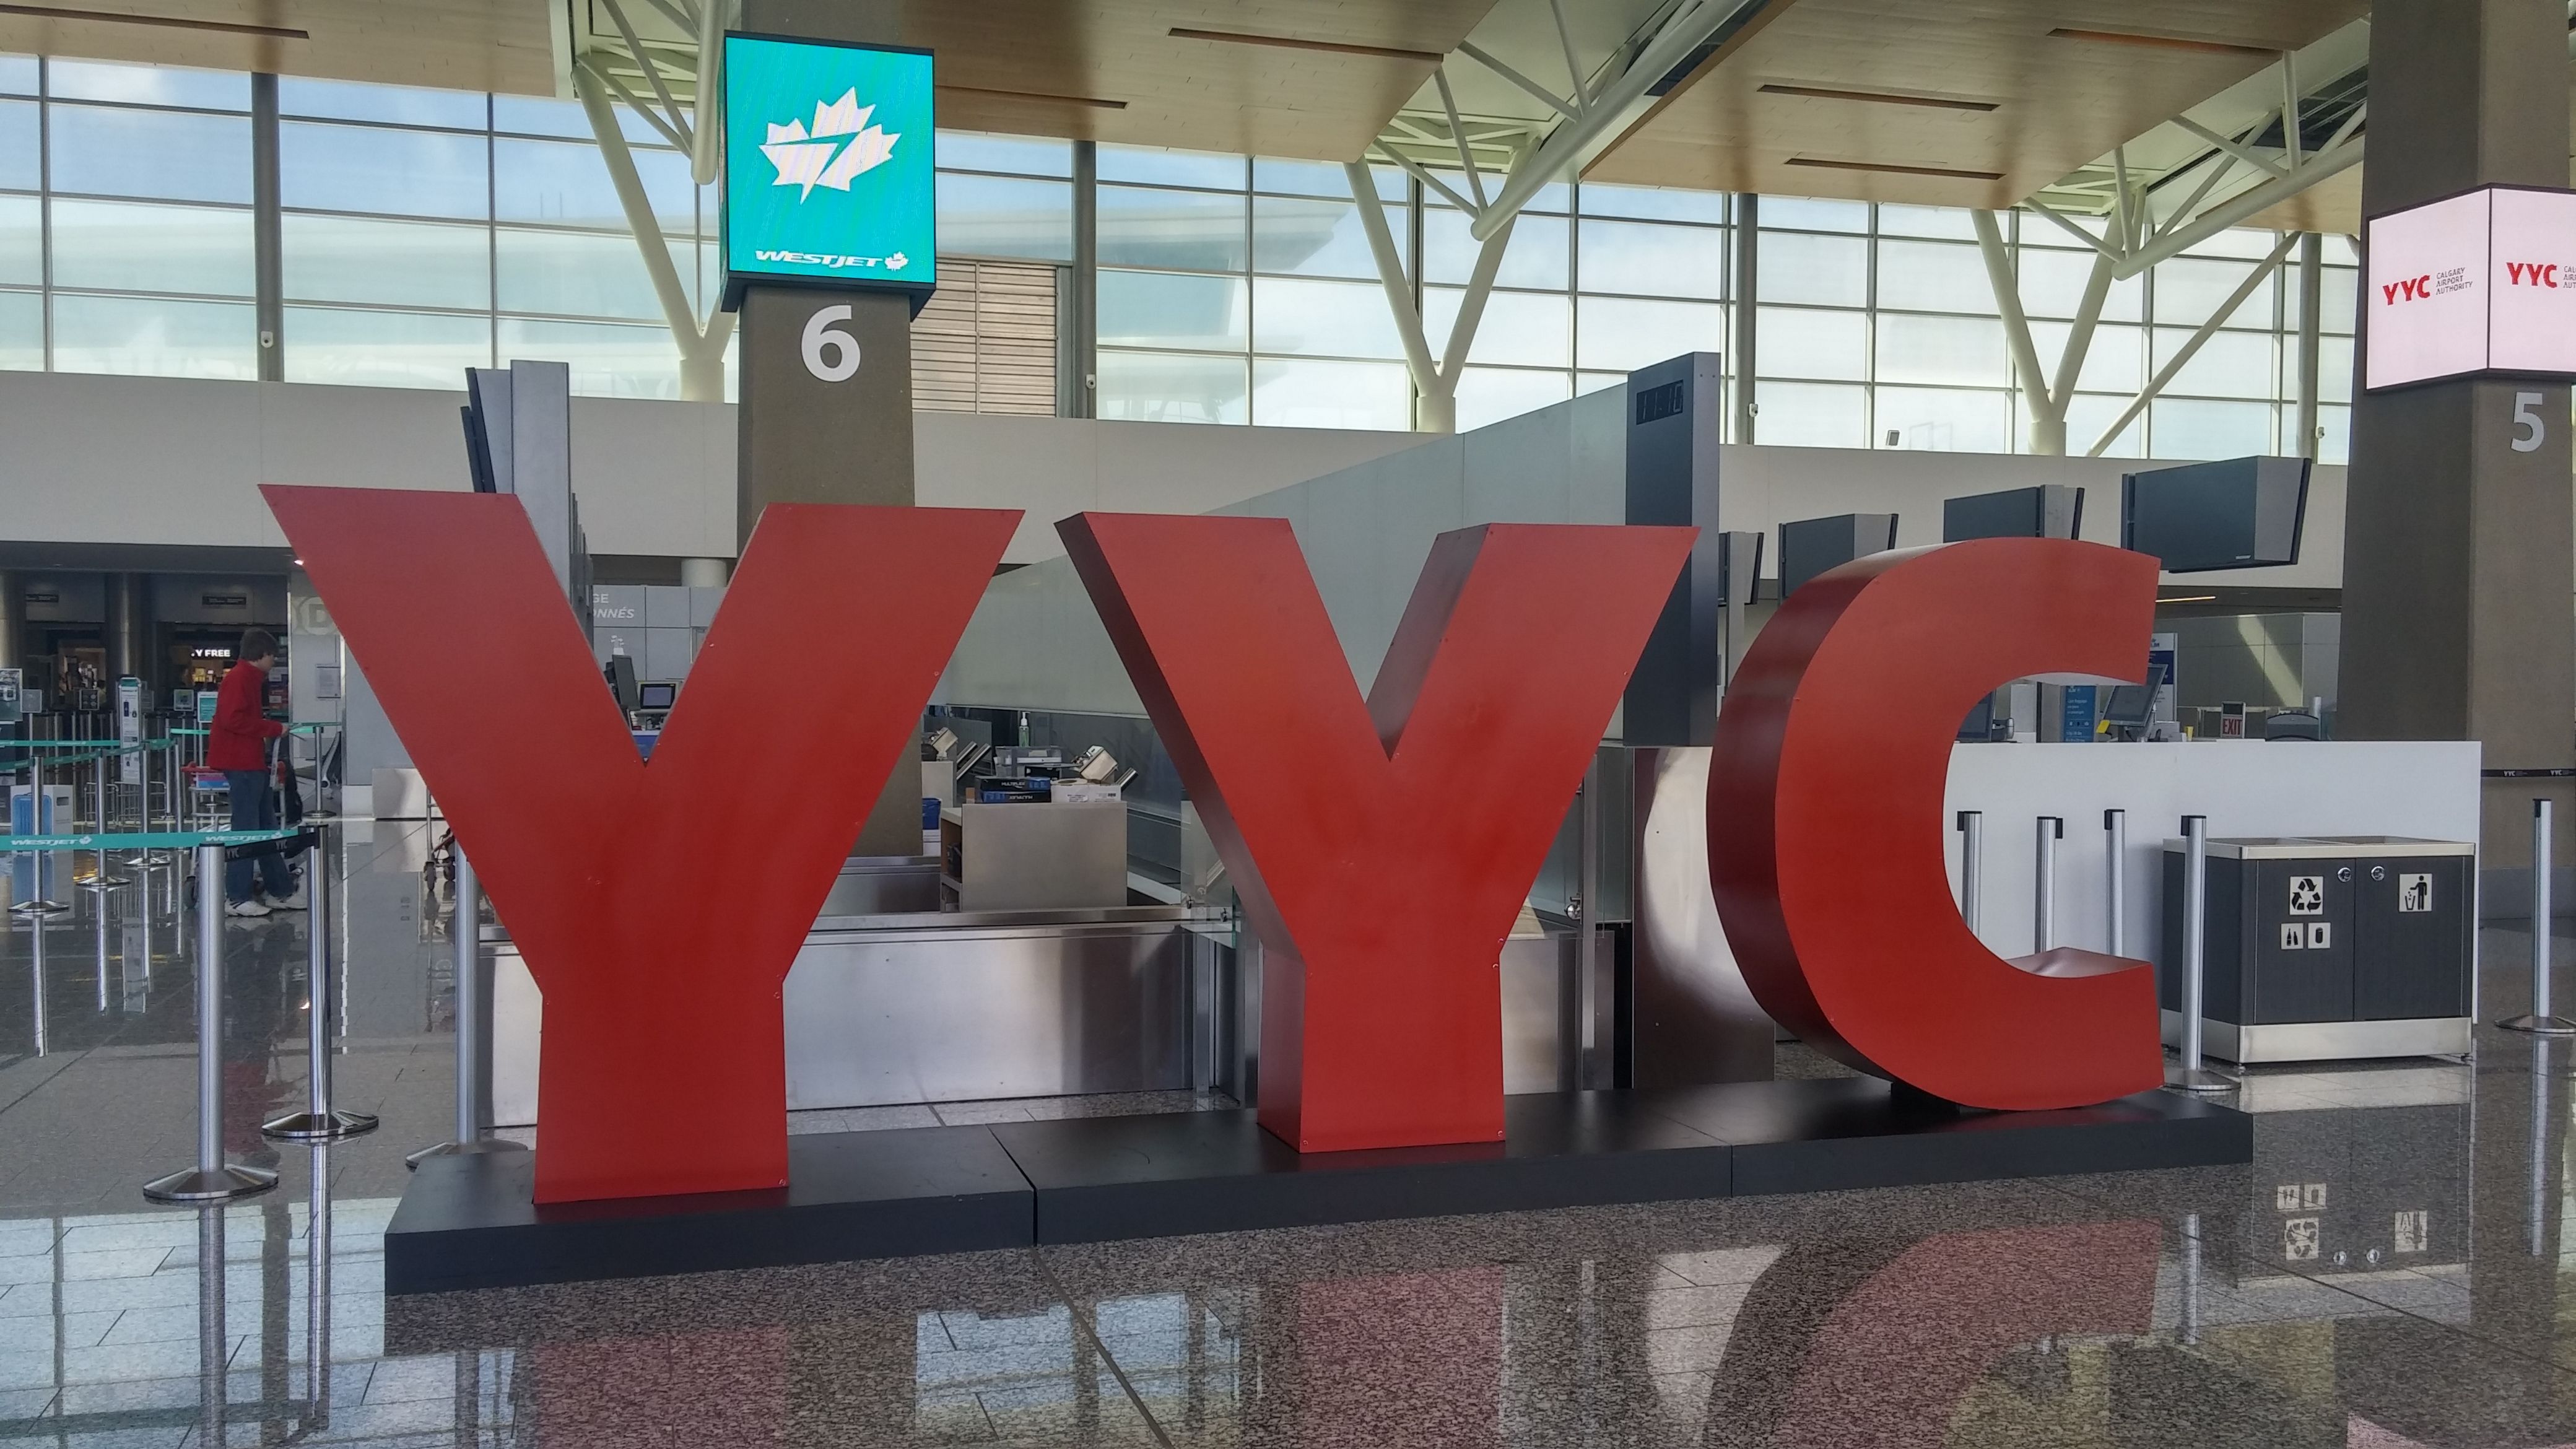 A Big YYC sign at Calgary Airport in Canada.